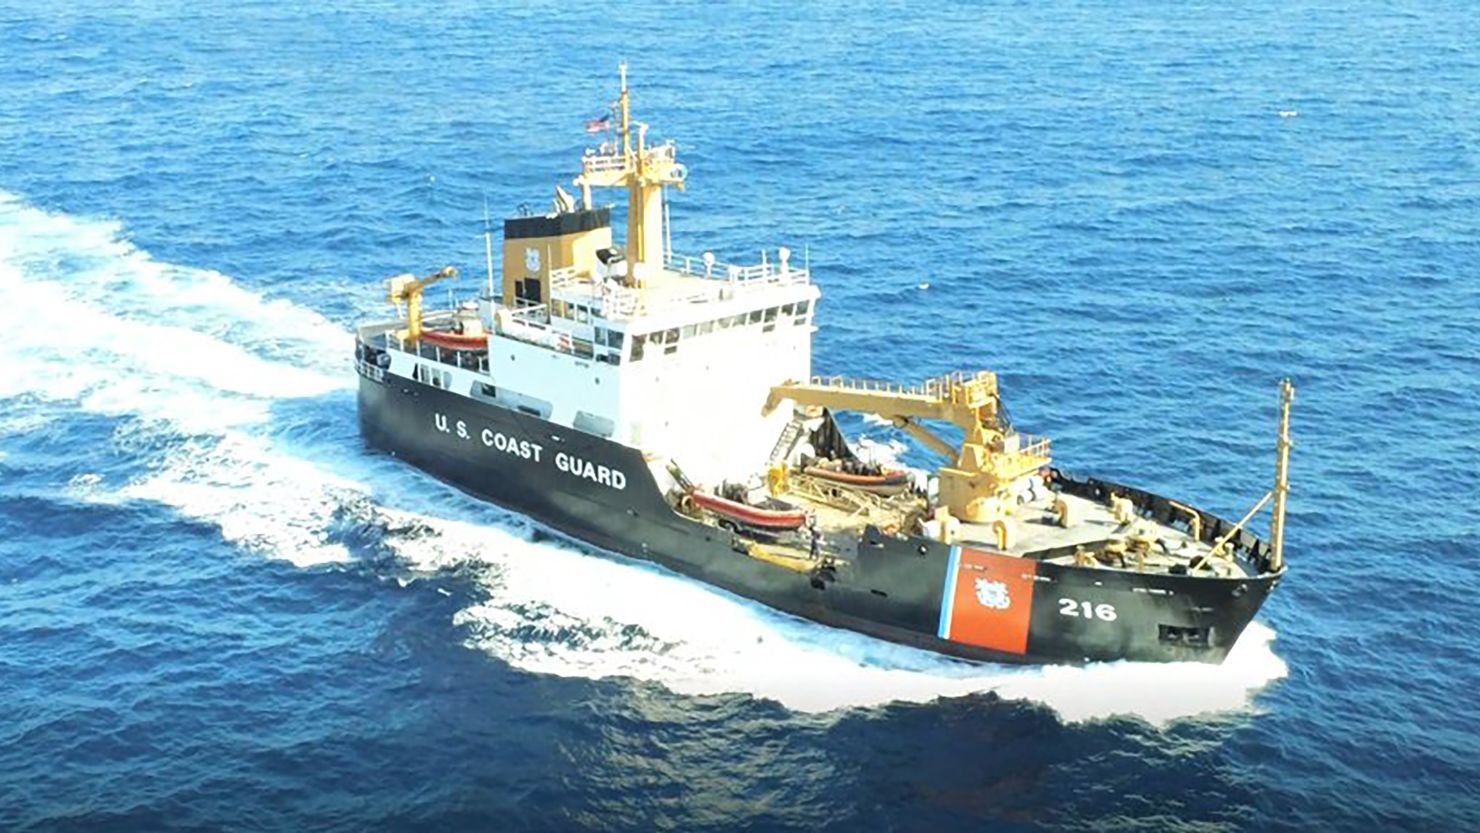 The Coast Guard Cutter Alder accidentally discharged about 500 gallons of diesel fuel 30 miles offshore of Fort Bragg, California, on Friday.